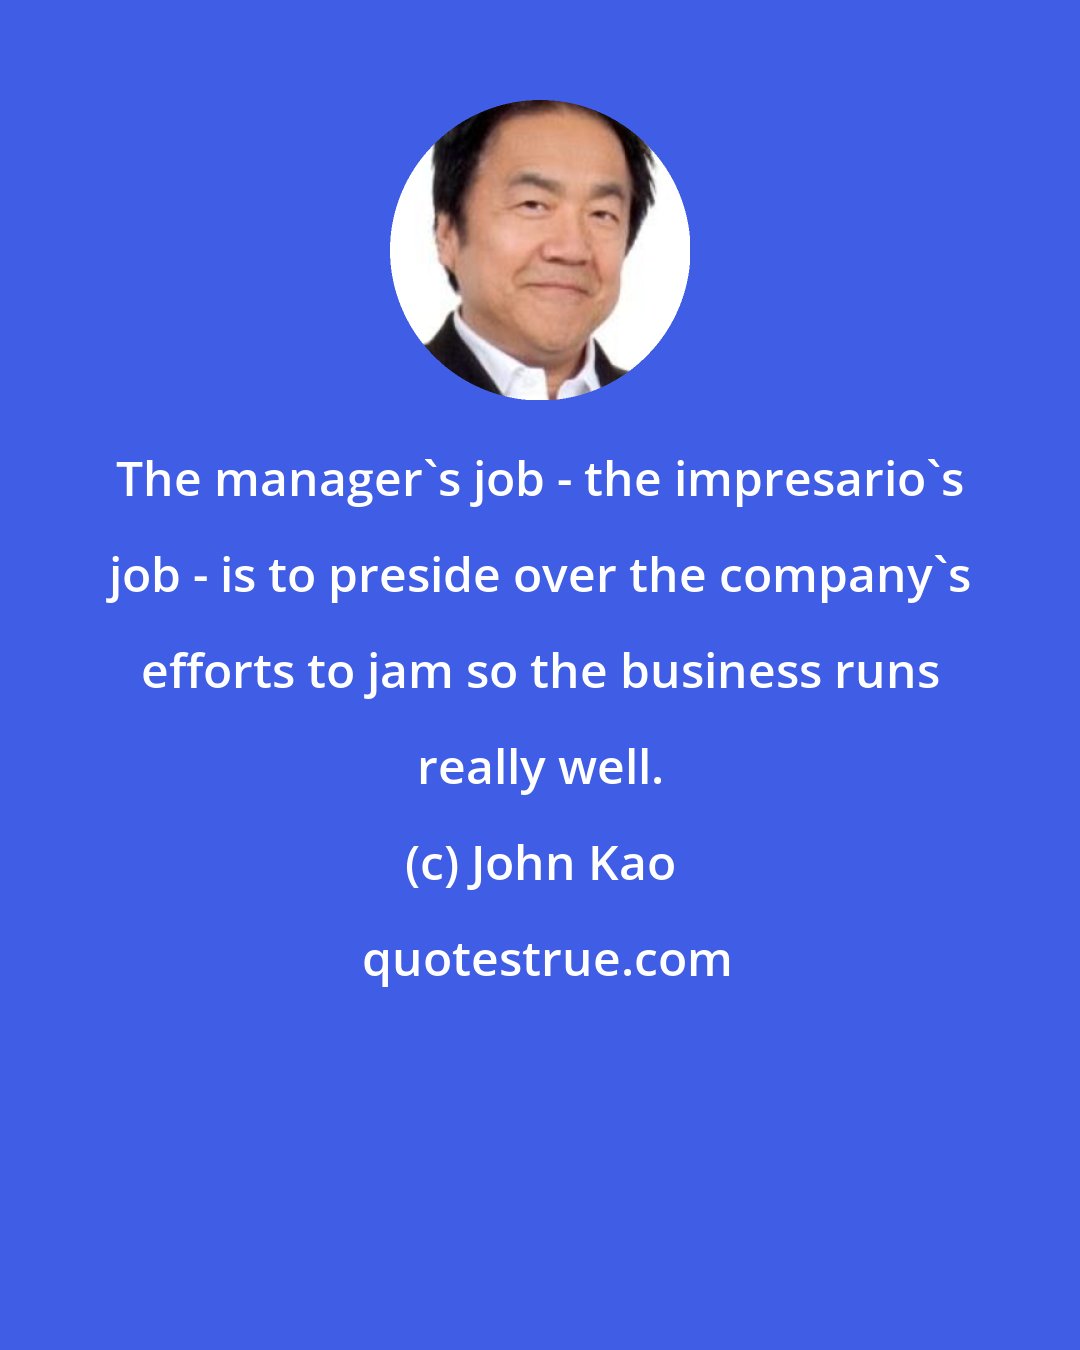 John Kao: The manager's job - the impresario's job - is to preside over the company's efforts to jam so the business runs really well.